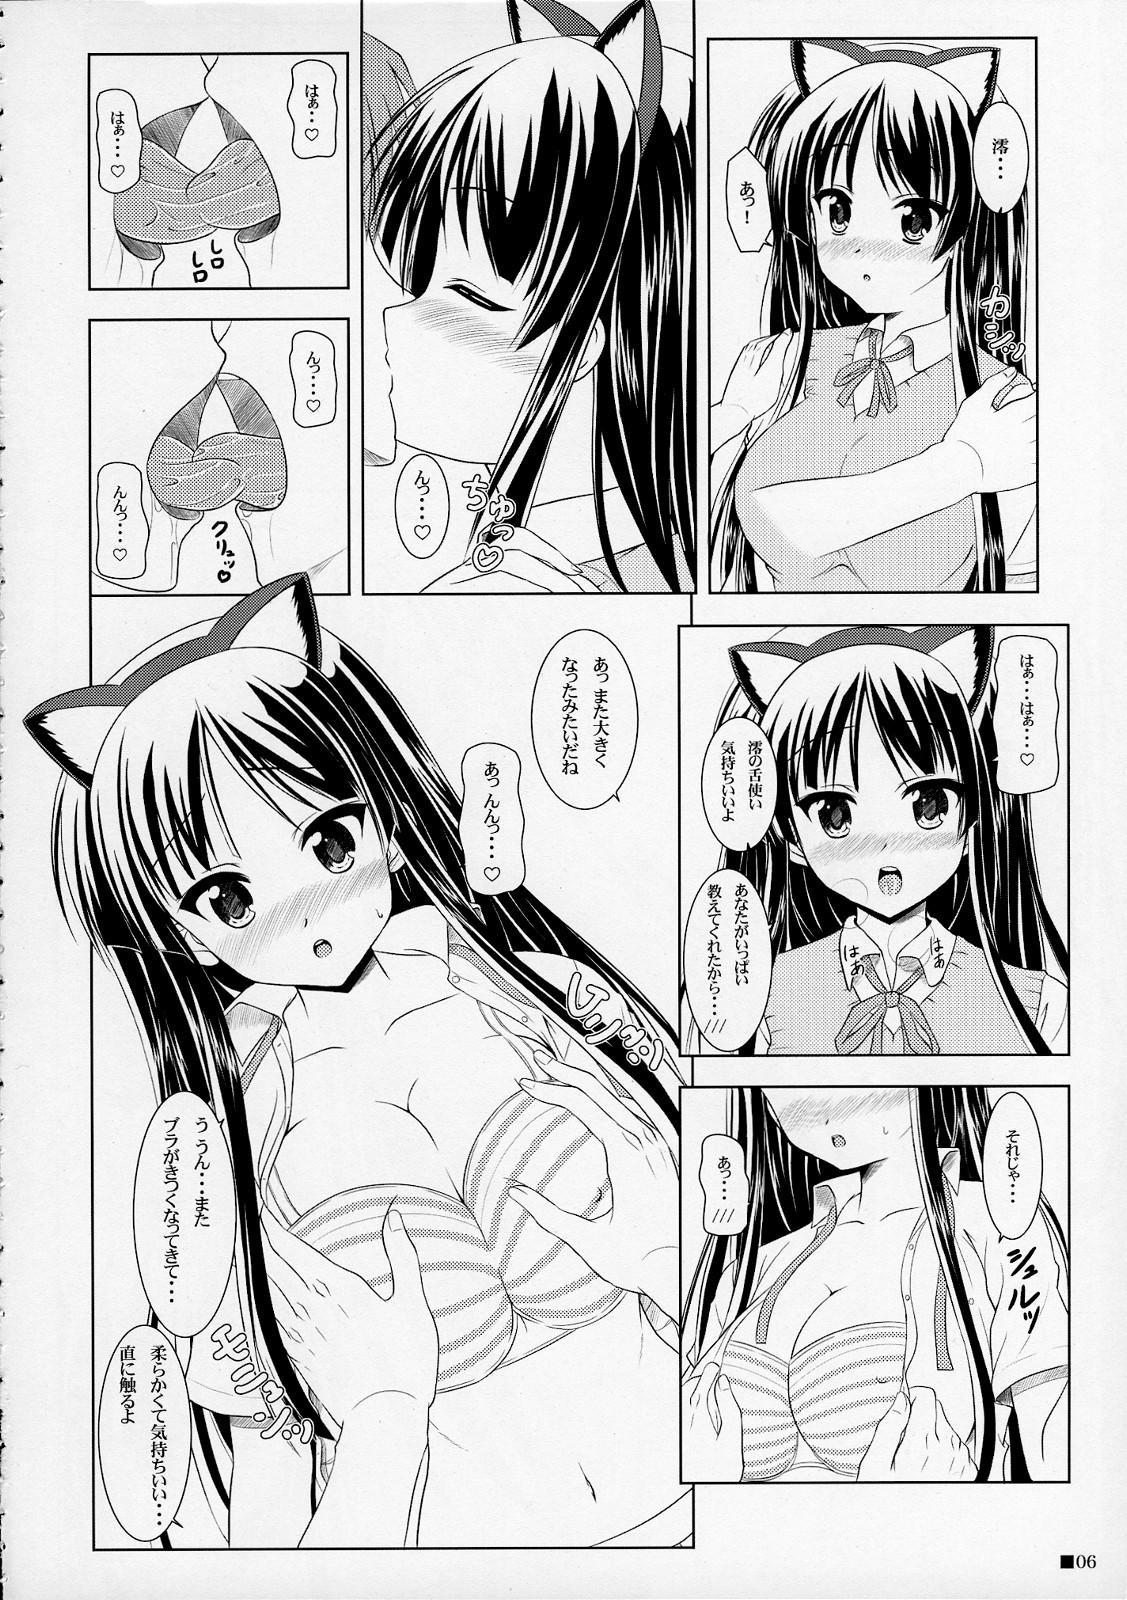 Relax MIO-NYAN! - K on 1080p - Page 5